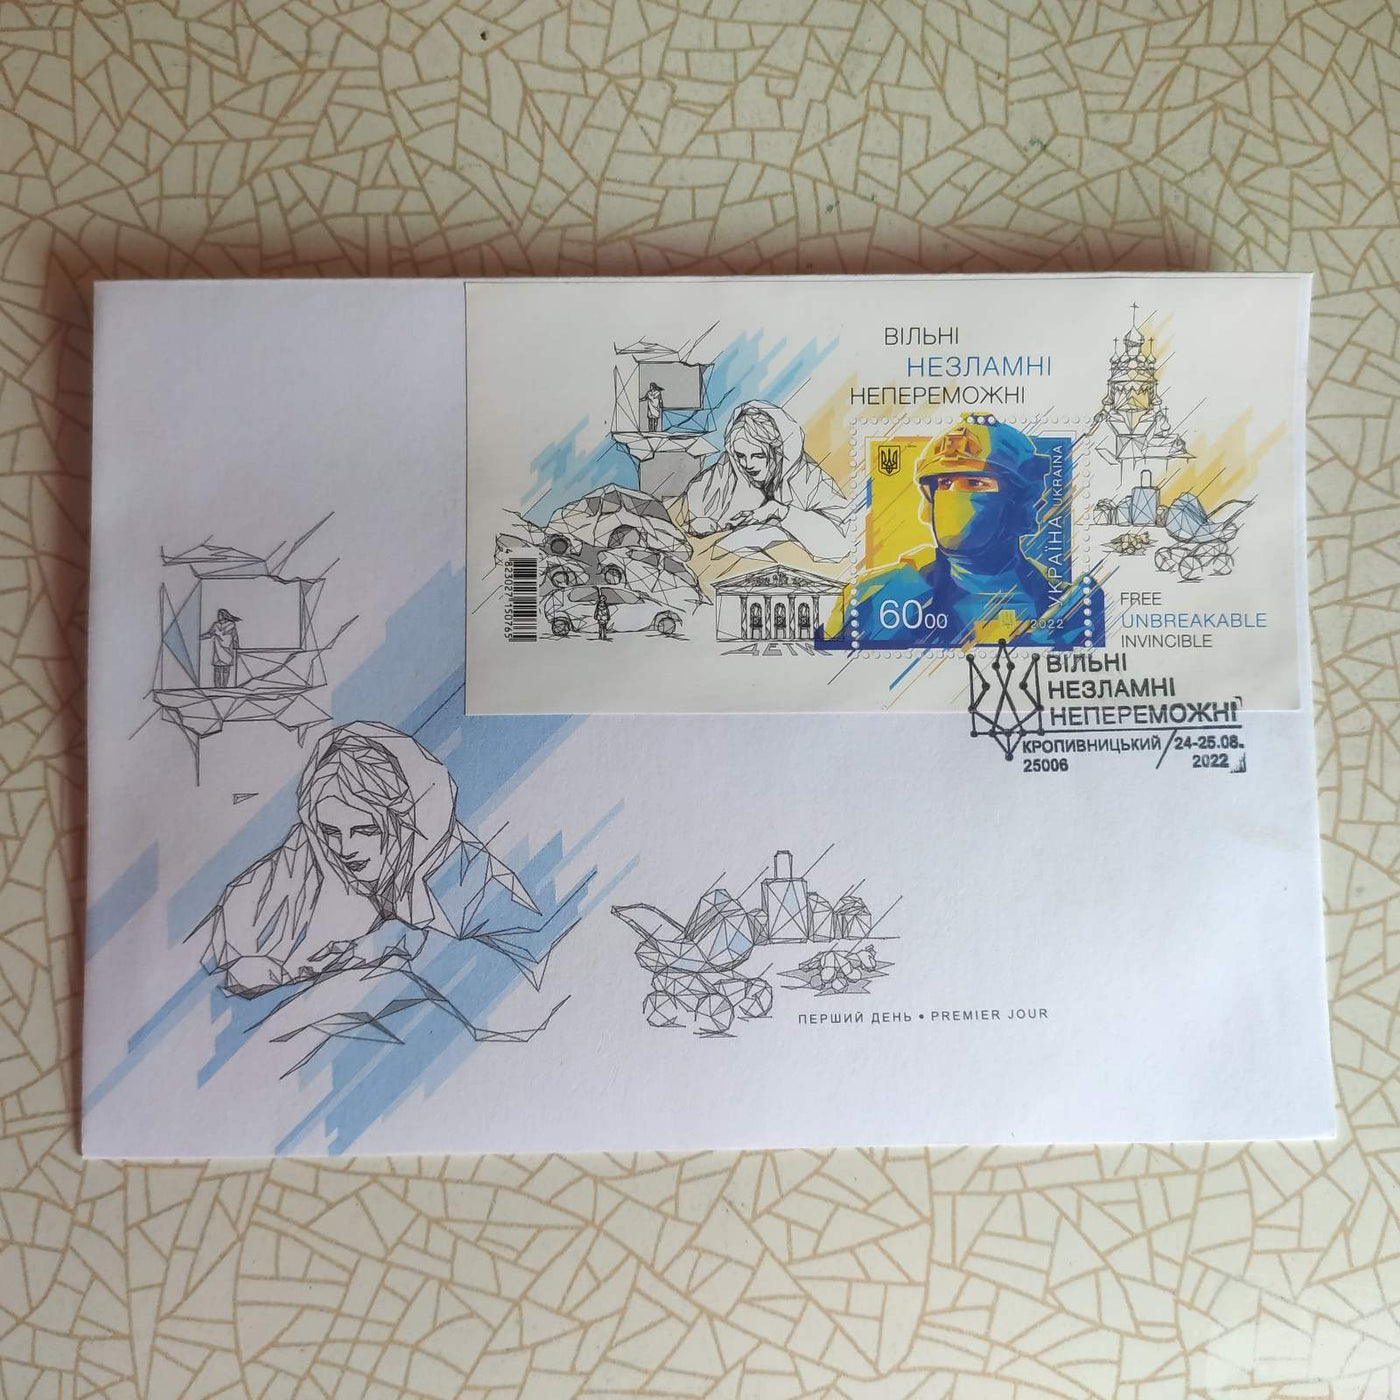 "Free, Unbreakable, Invincible", First Day Cover with cancellation